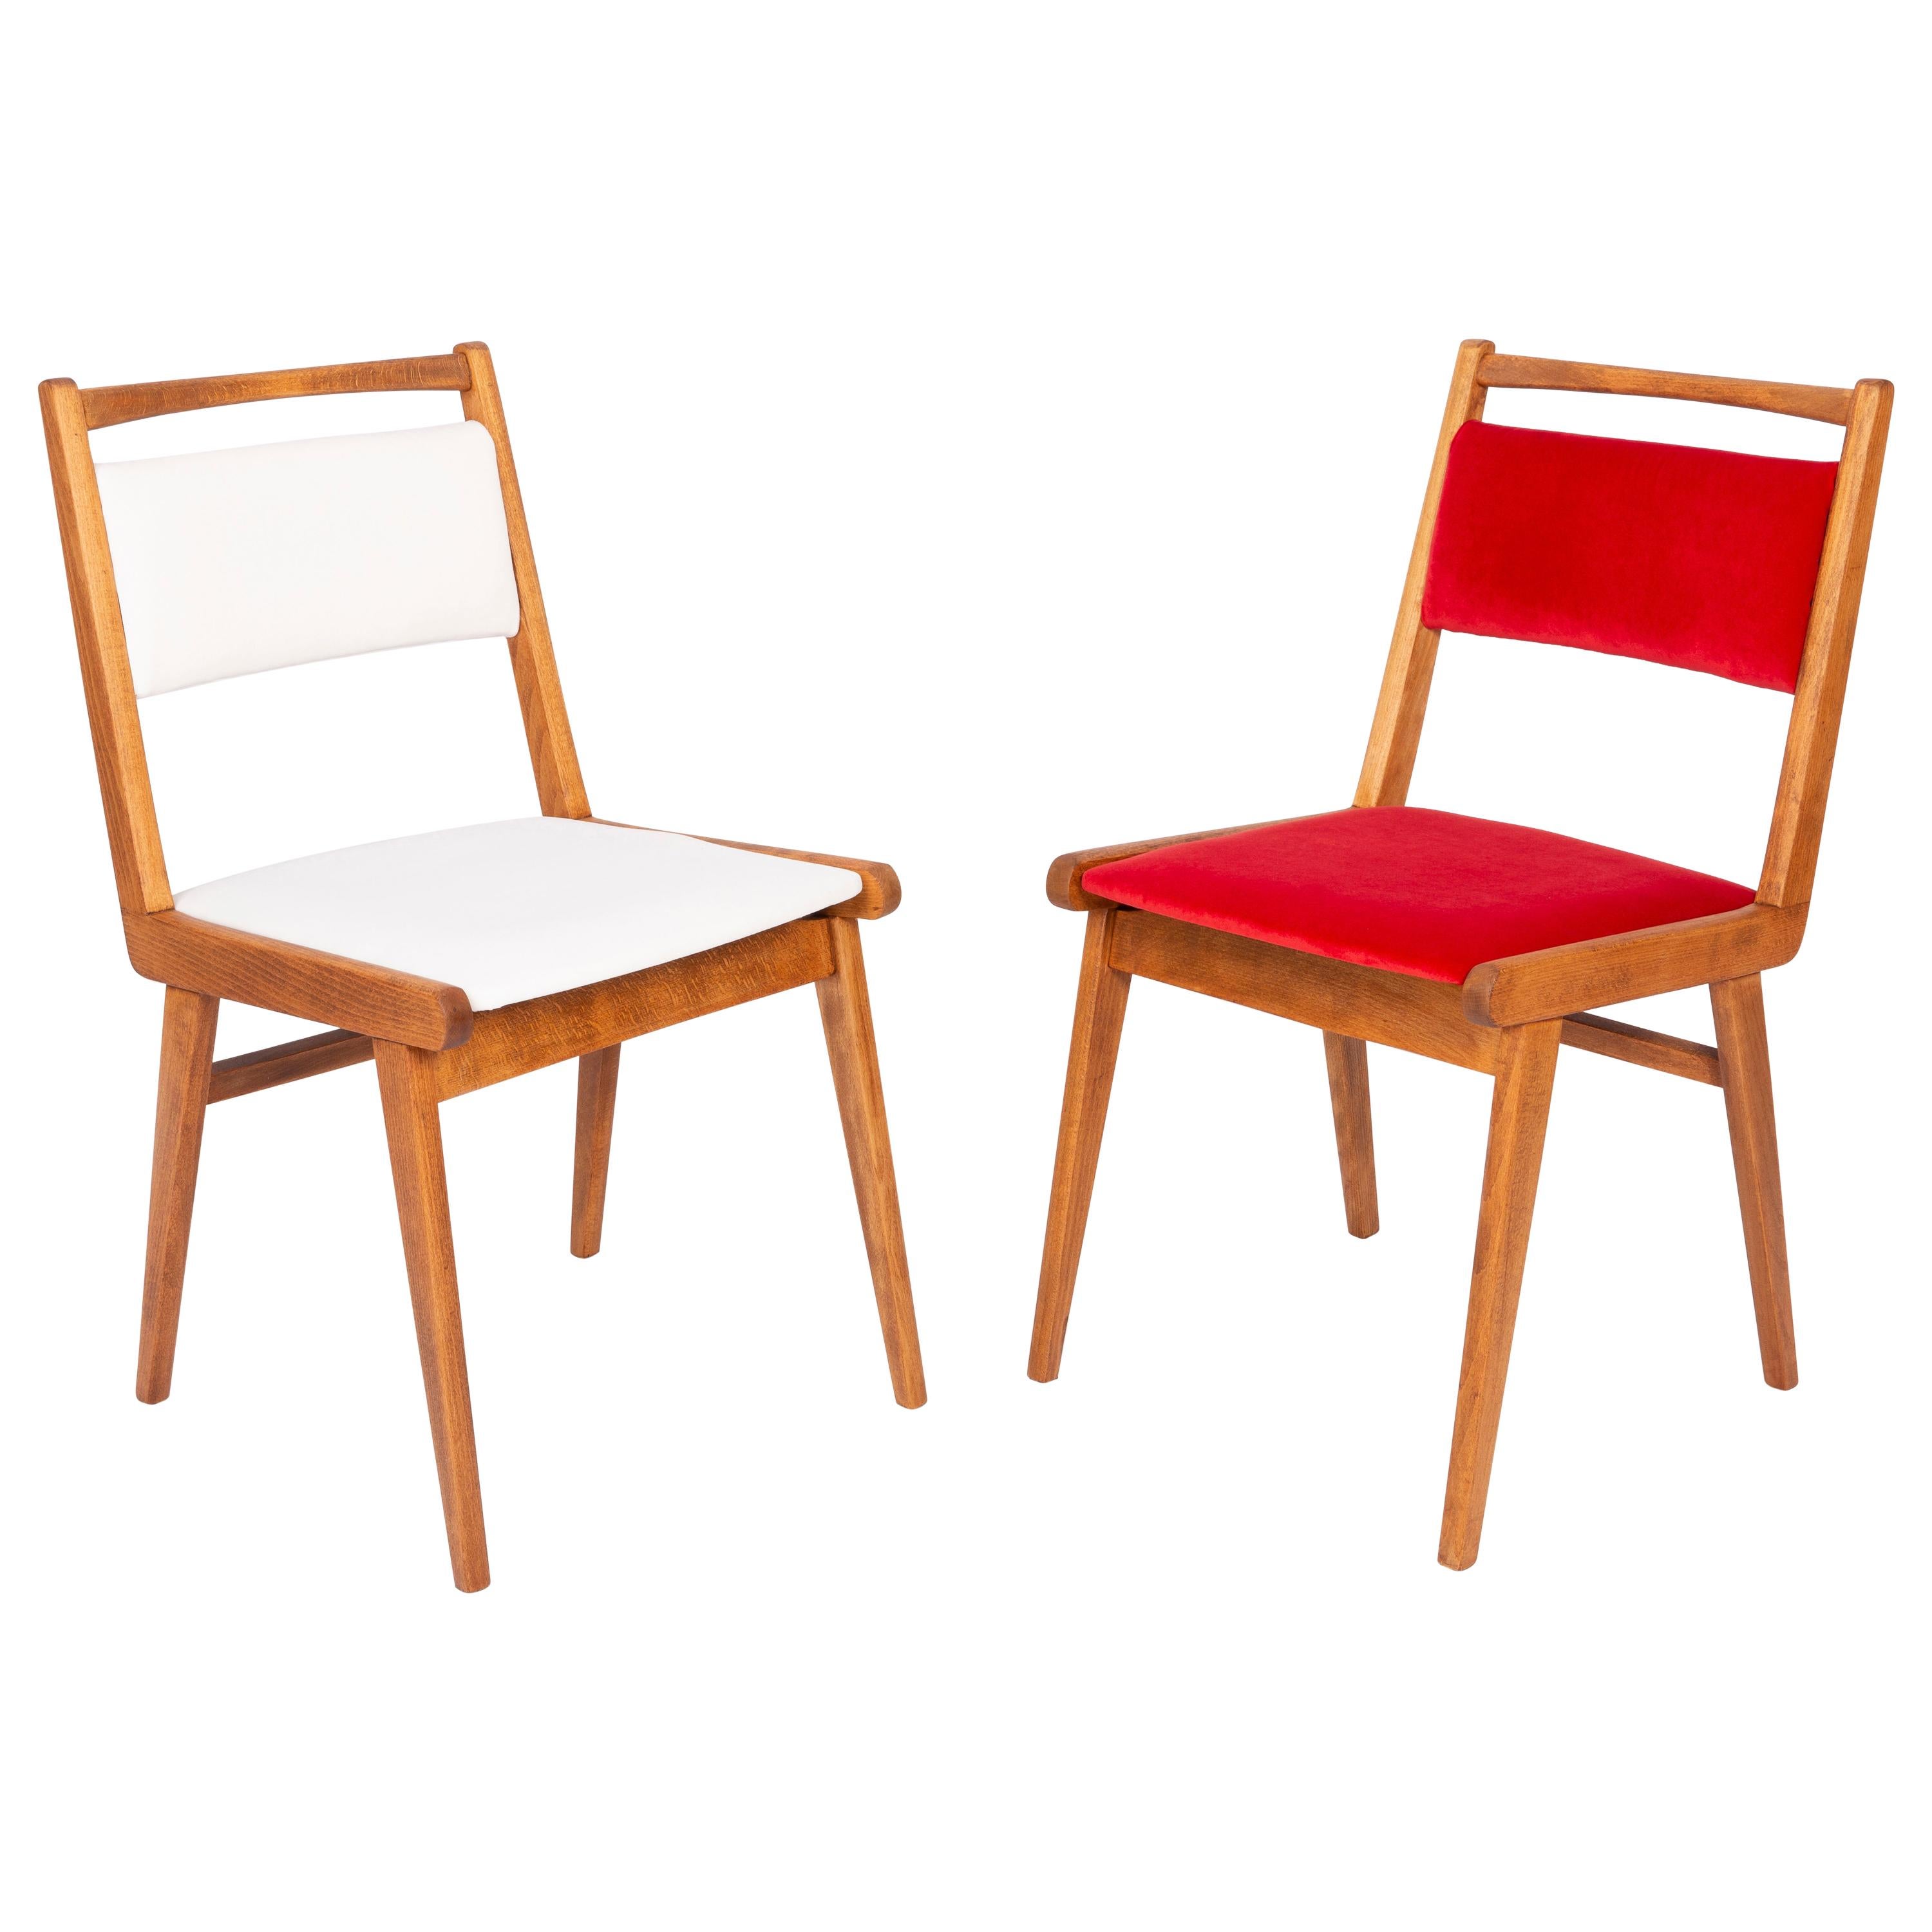 Set of Two 20th Century White and Red Velvet Chairs, Poland, 1960s